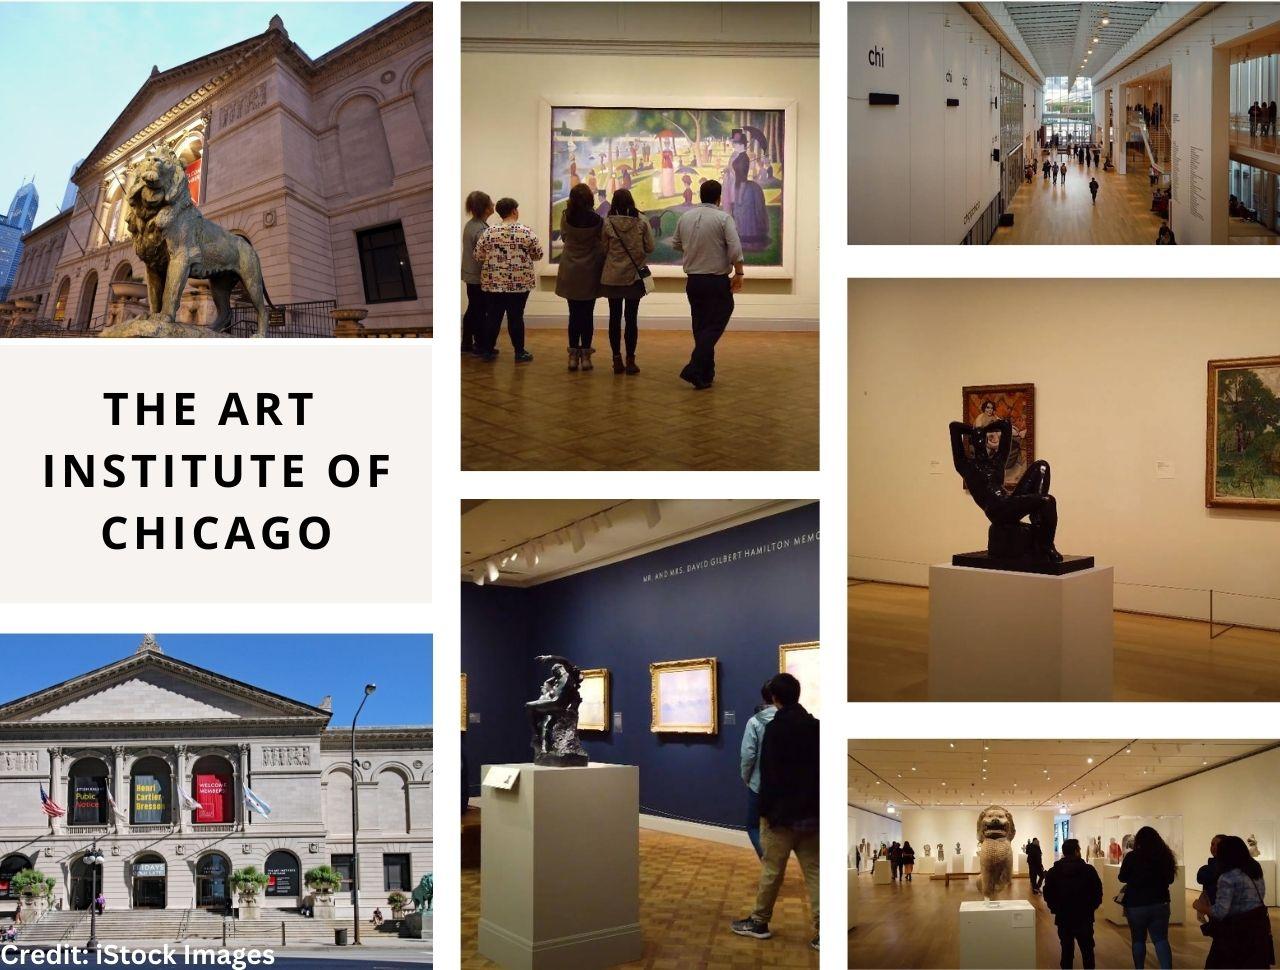 The Art Institute of Chicago: Hours and Tickets, More!